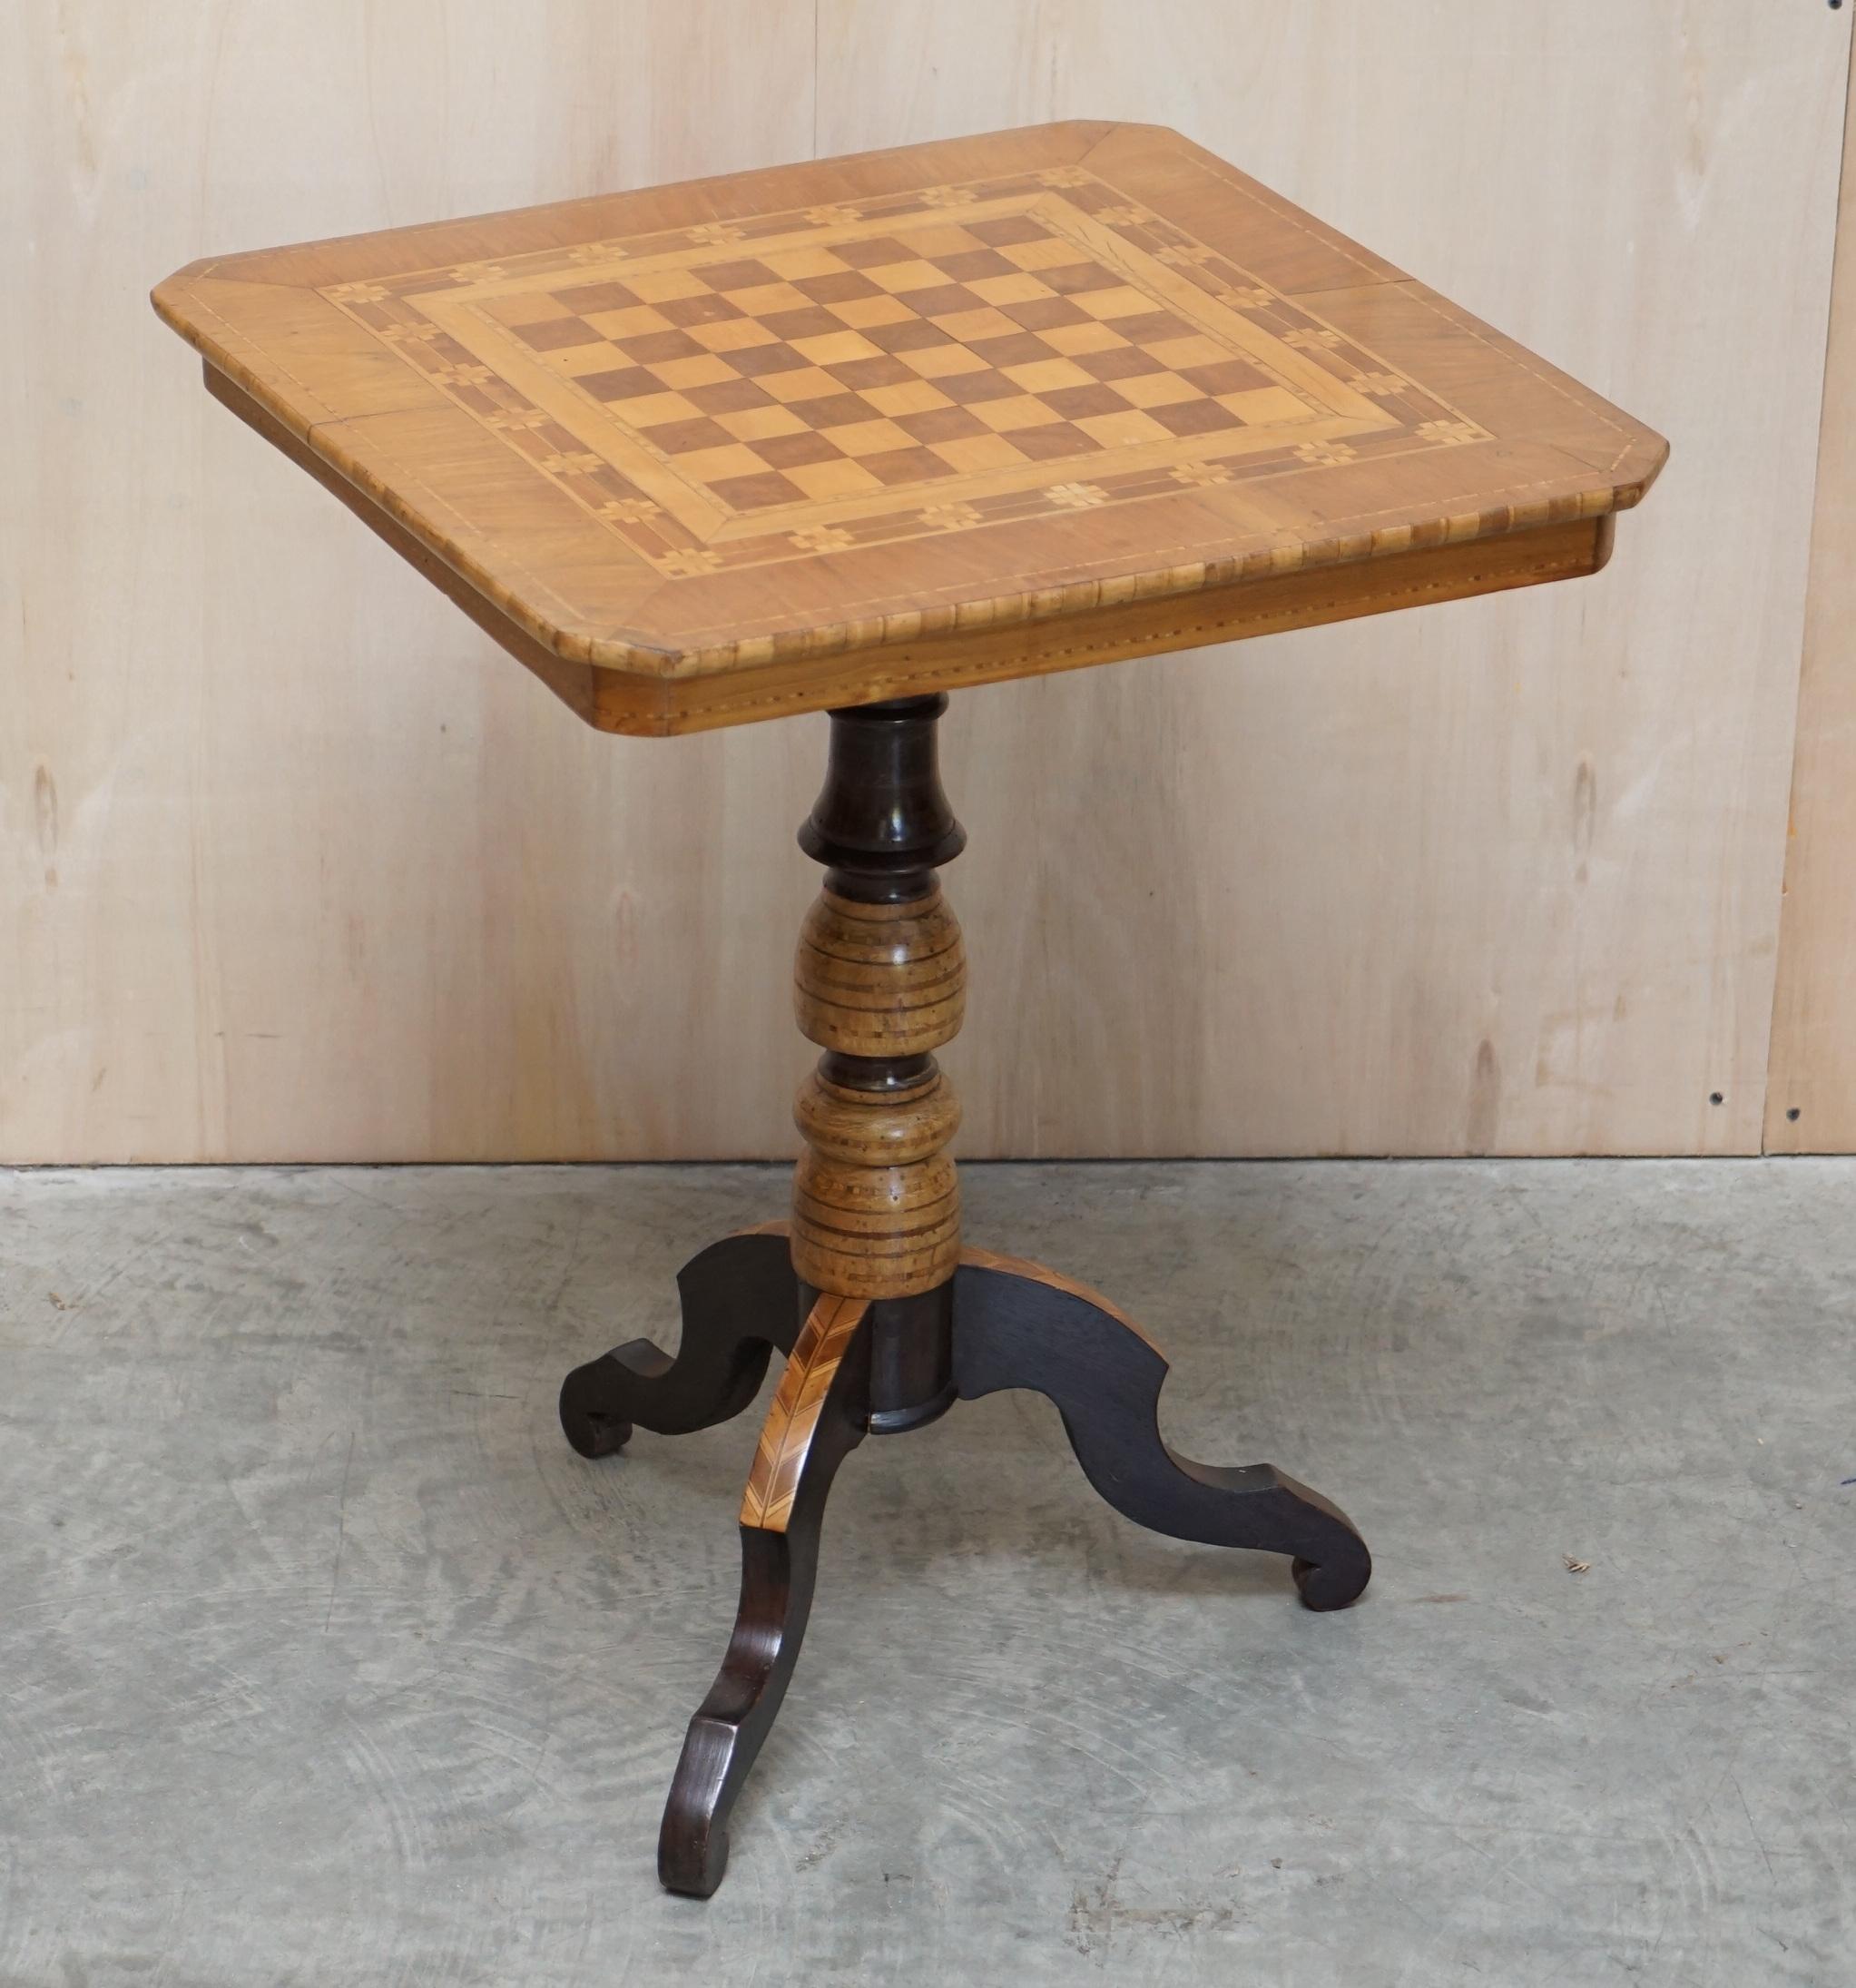 We are delighted to offer for sale this lovely Victorian period, fruitewood, satinwood and walnut occasional tripod chessboard table.

A very good looking well-made and function piece of furniture, extremely decorative, the top has gorgeous cuts